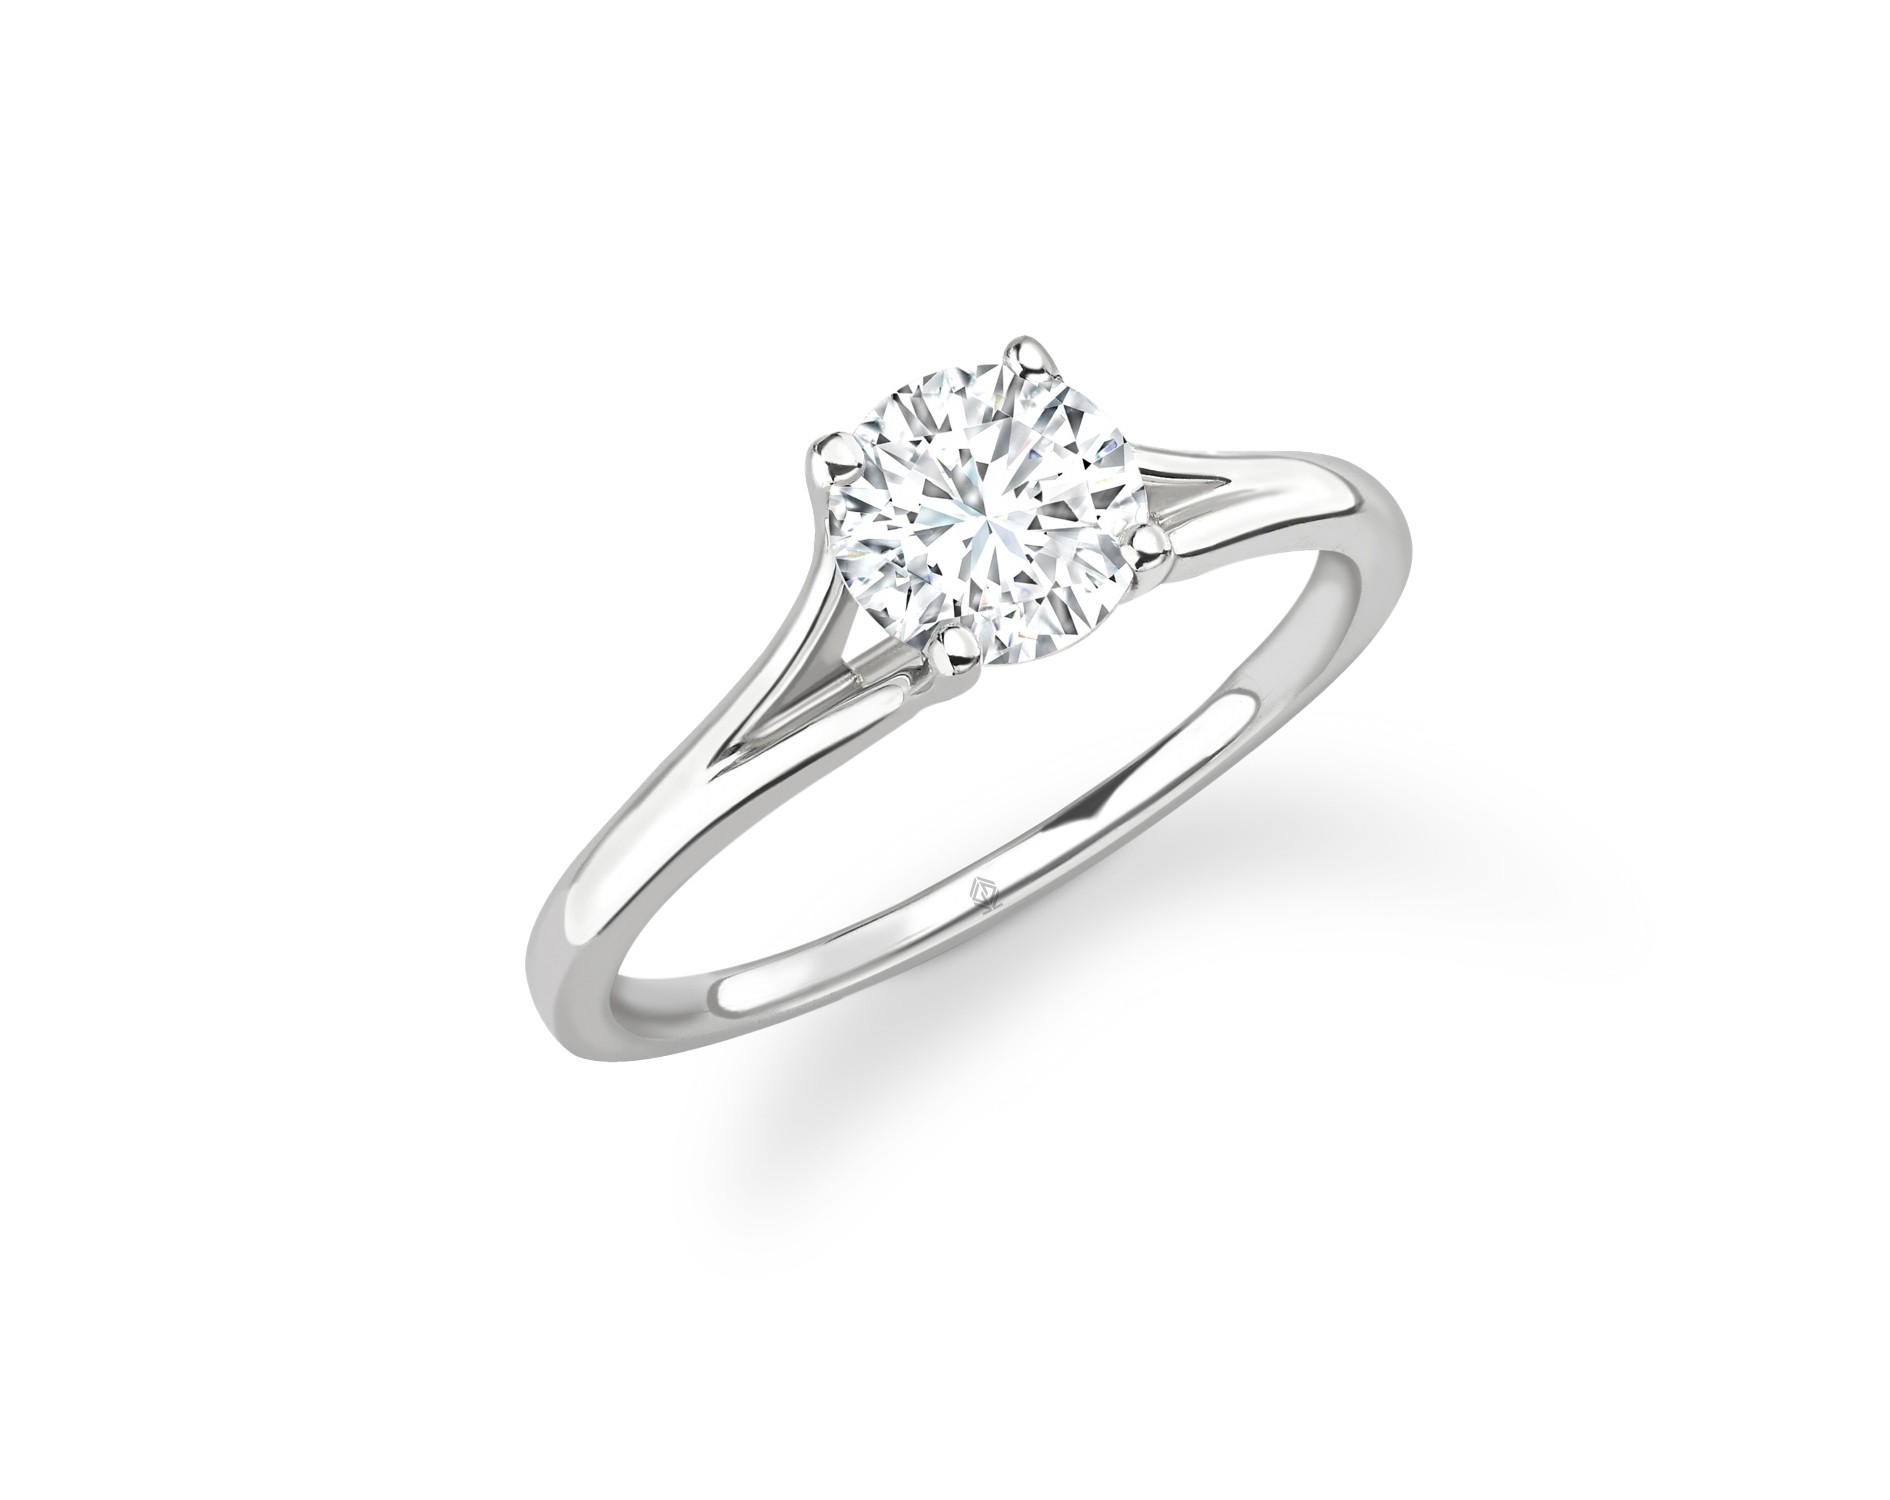 18K WHITE GOLD 4 PRONGS SOLITAIRE ROUND CUT DIAMOND ENGAGEMENT RING WITH SPLIT SHANK